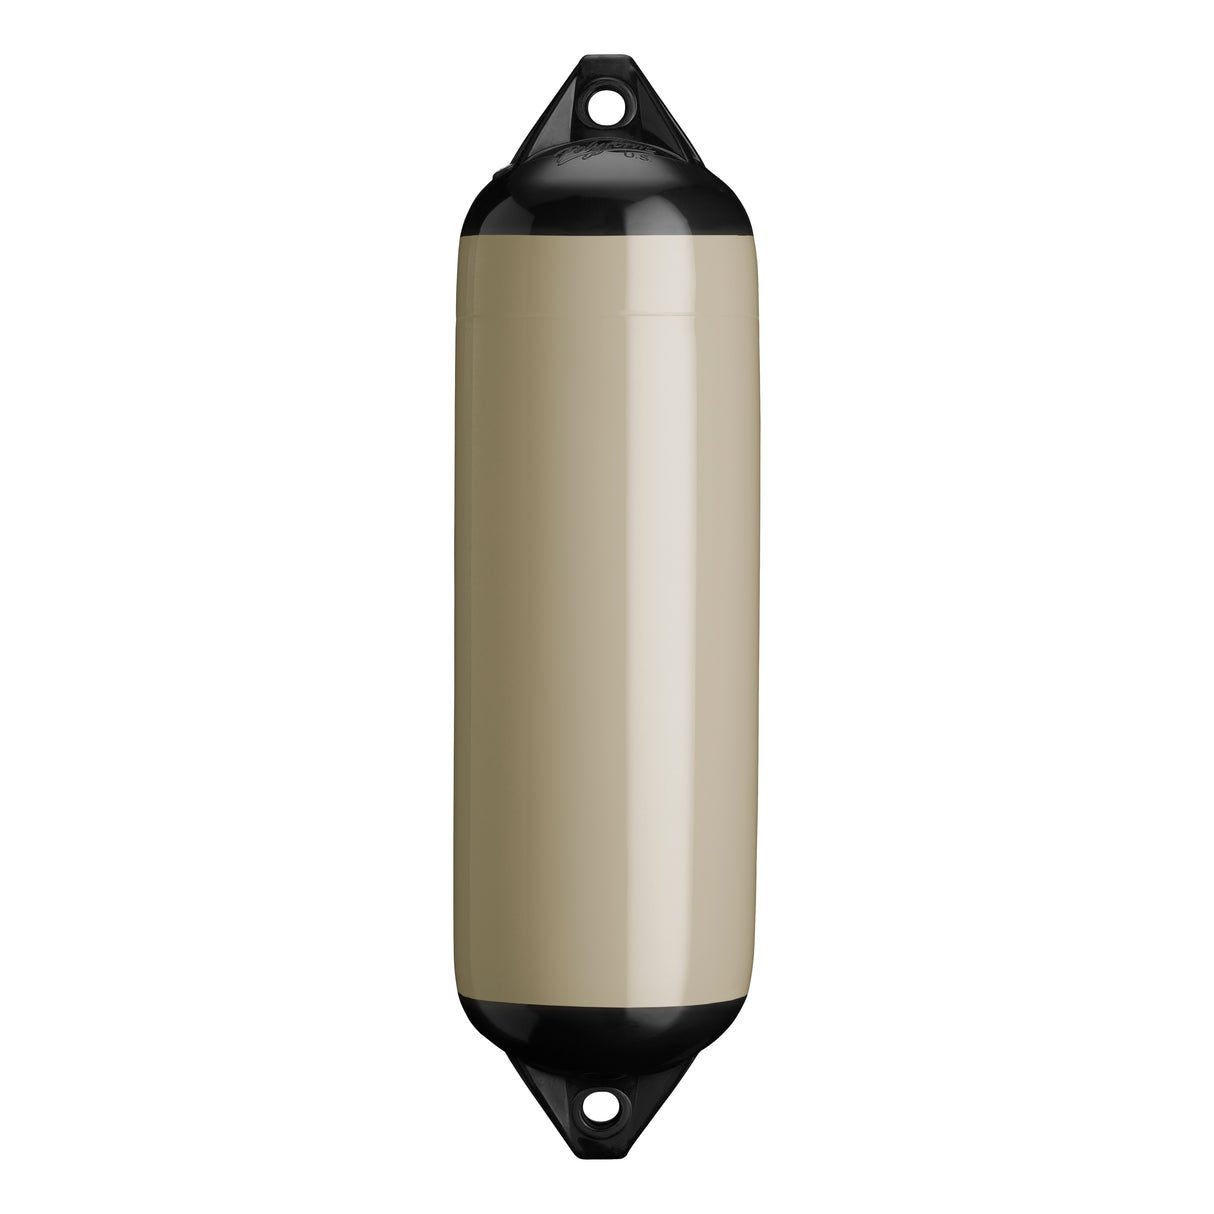 Sand boat fender with Black-Top, Polyform F-3